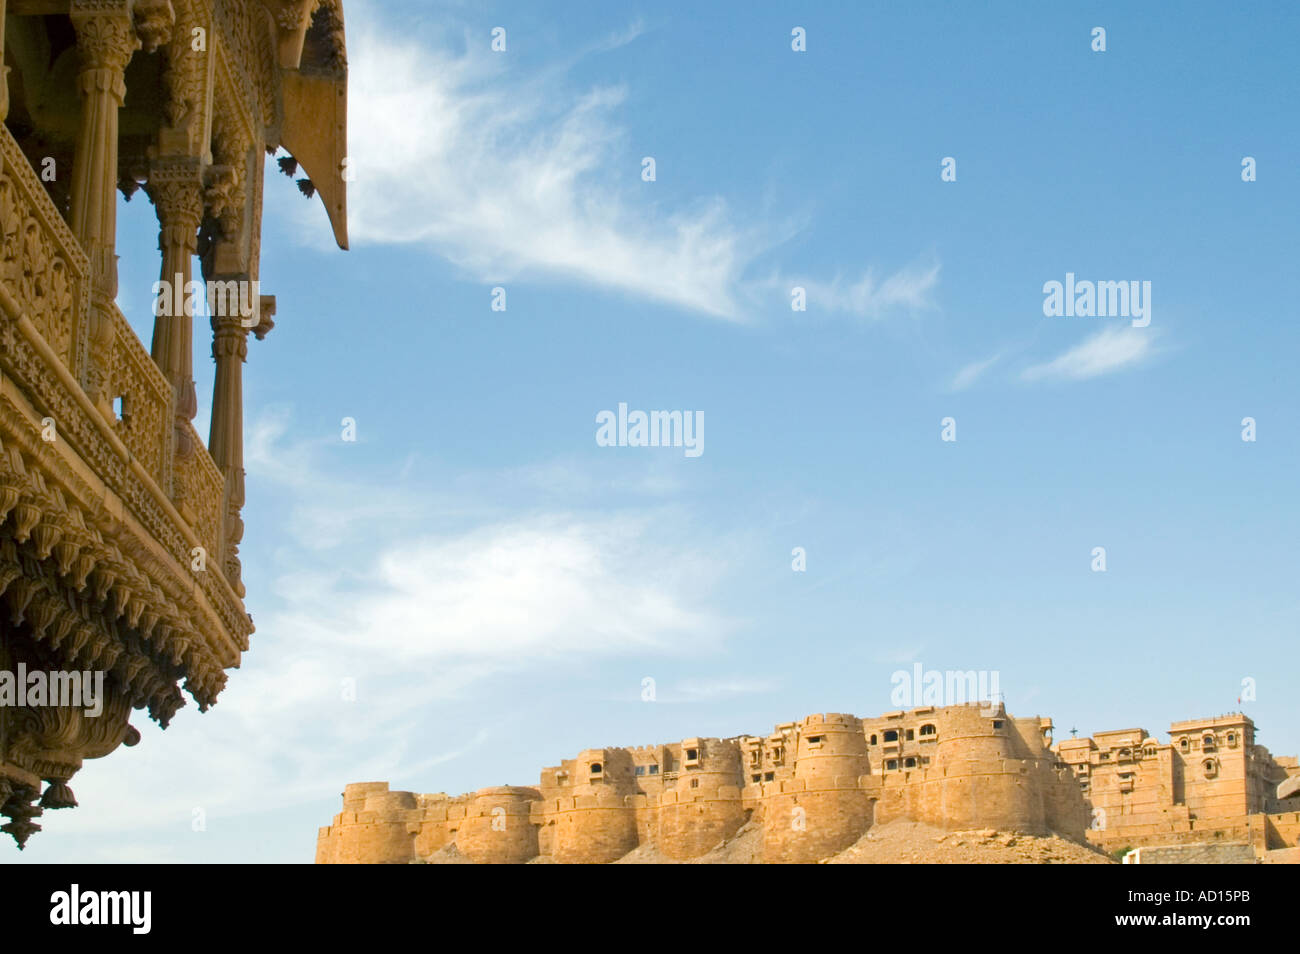 Horizontal wide angle of the Jaisalmer Fort with a Jharokha 'balcony' in foreground Stock Photo